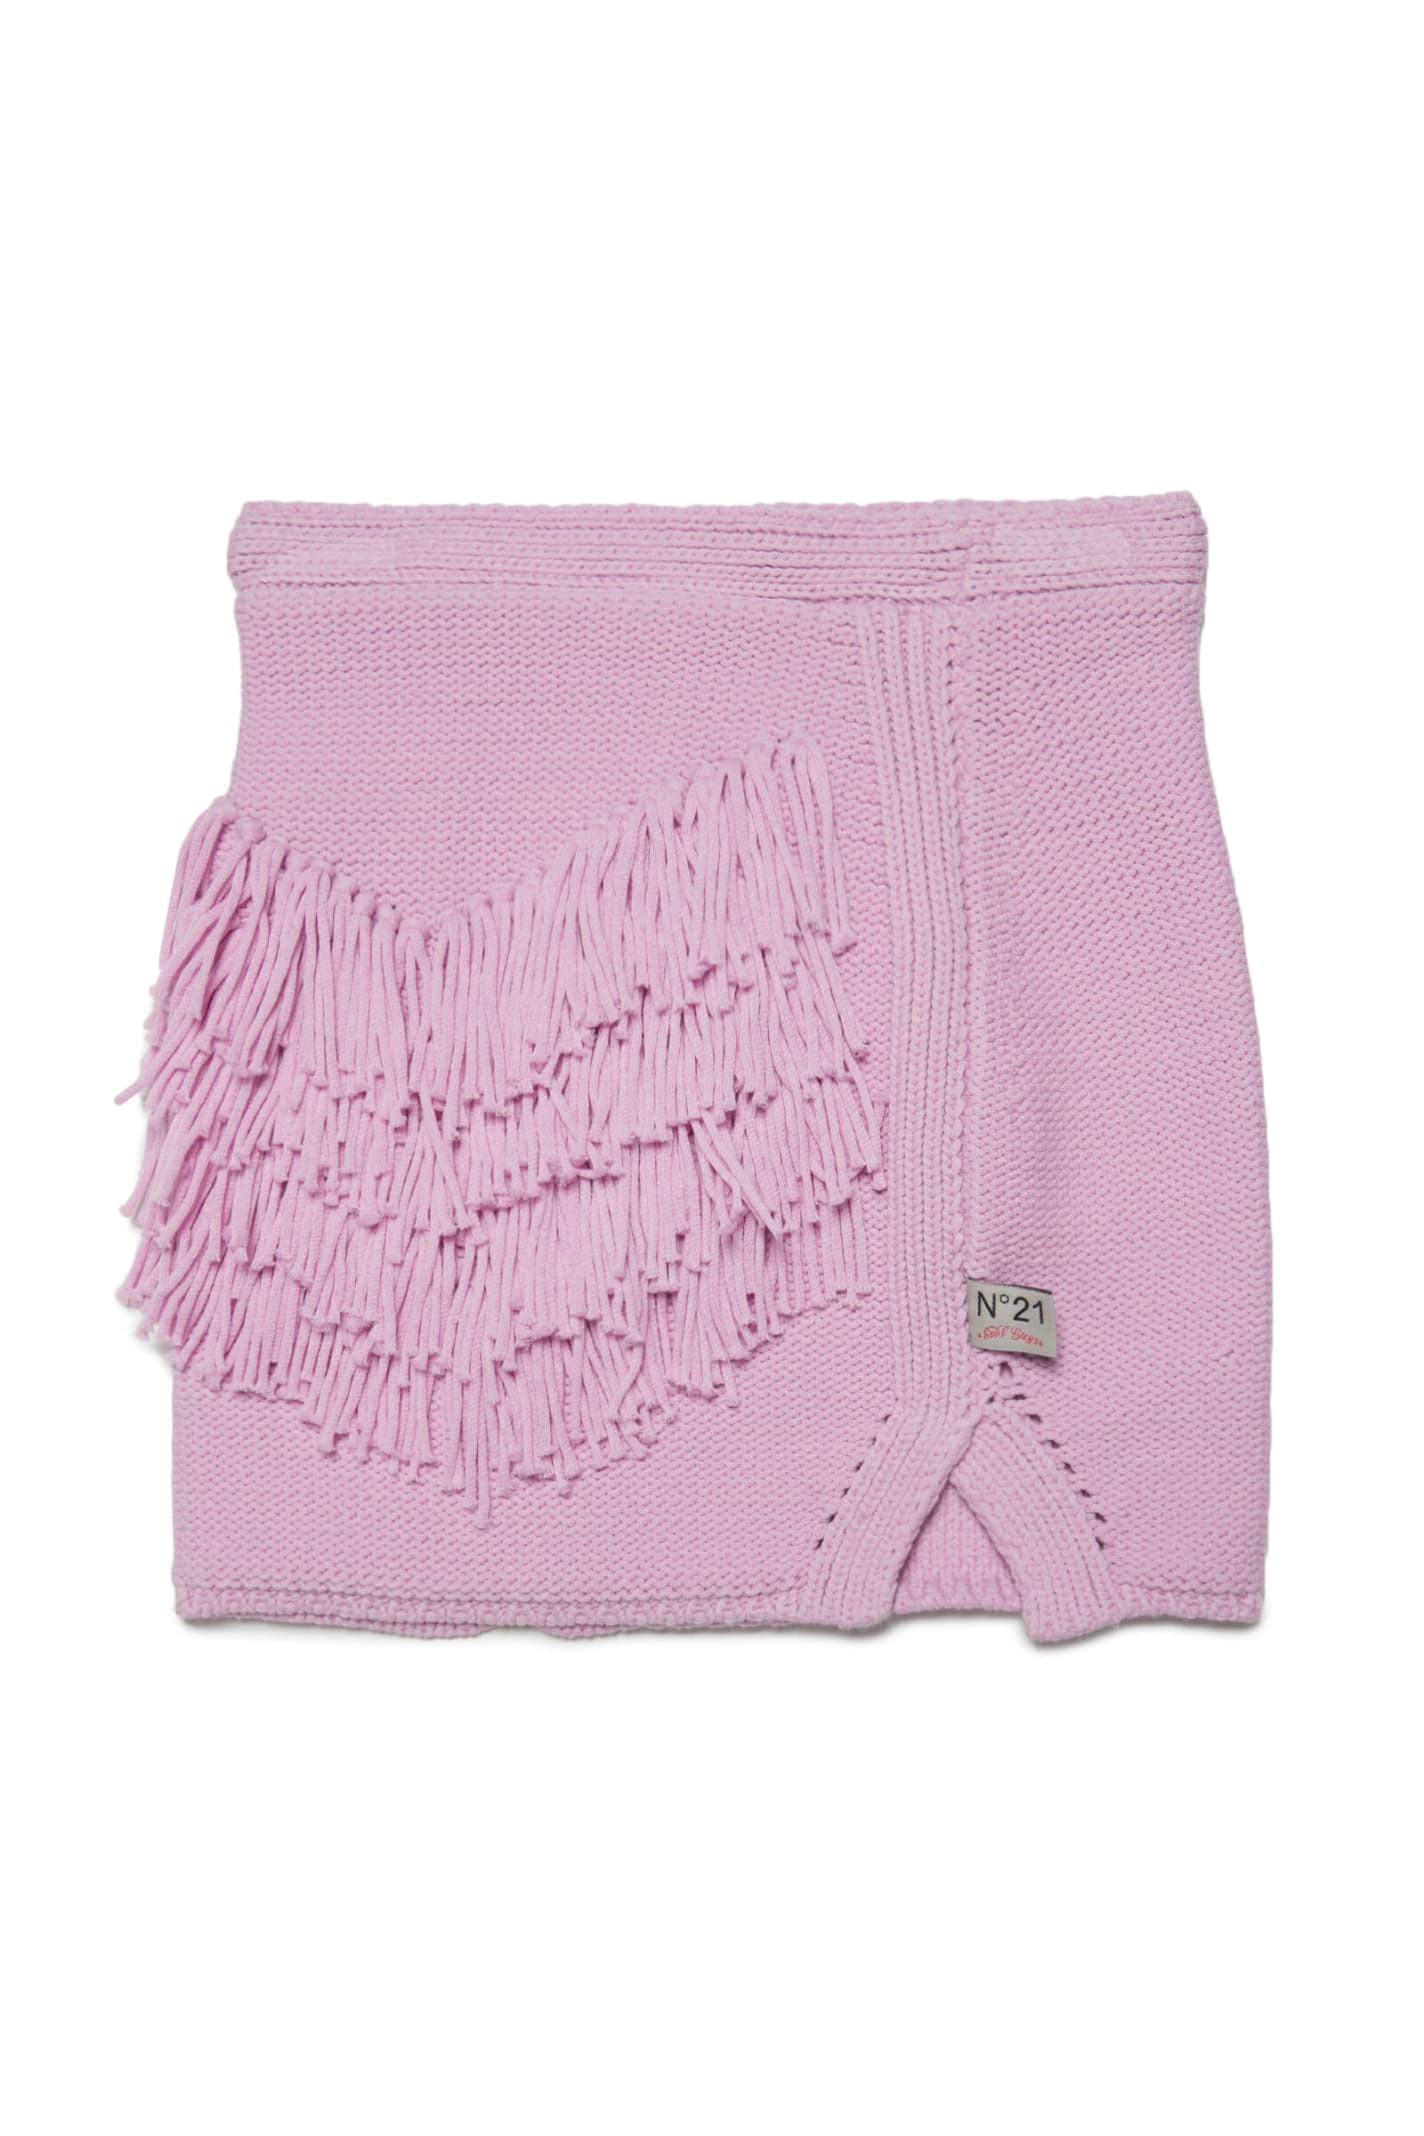 N°21 N21G51F SKIRT N°21 PINK HAND-MADE EFFECT KNIT SKIRT WITH APPLIED FRINGES